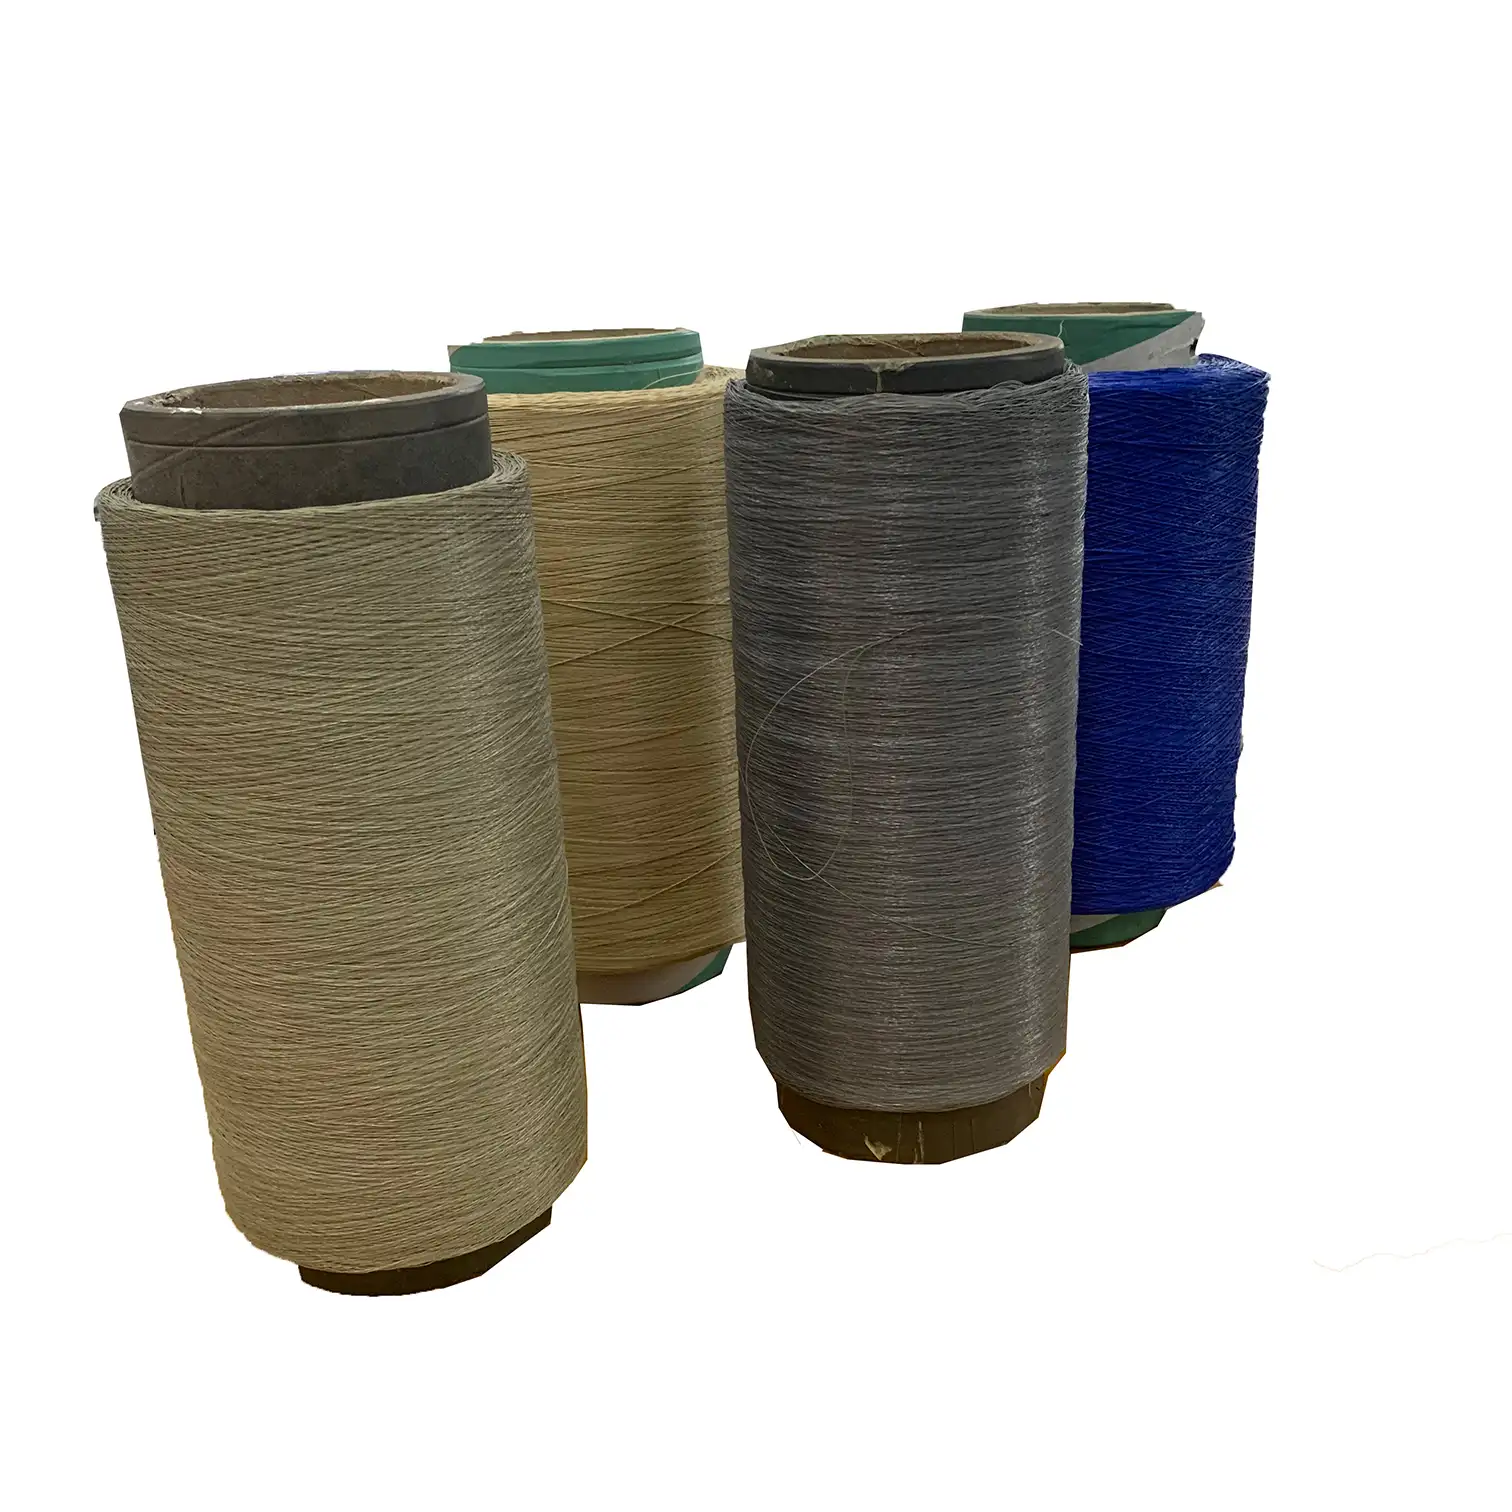 Pvc coated yarn used for outdoor cane chair can resist UV